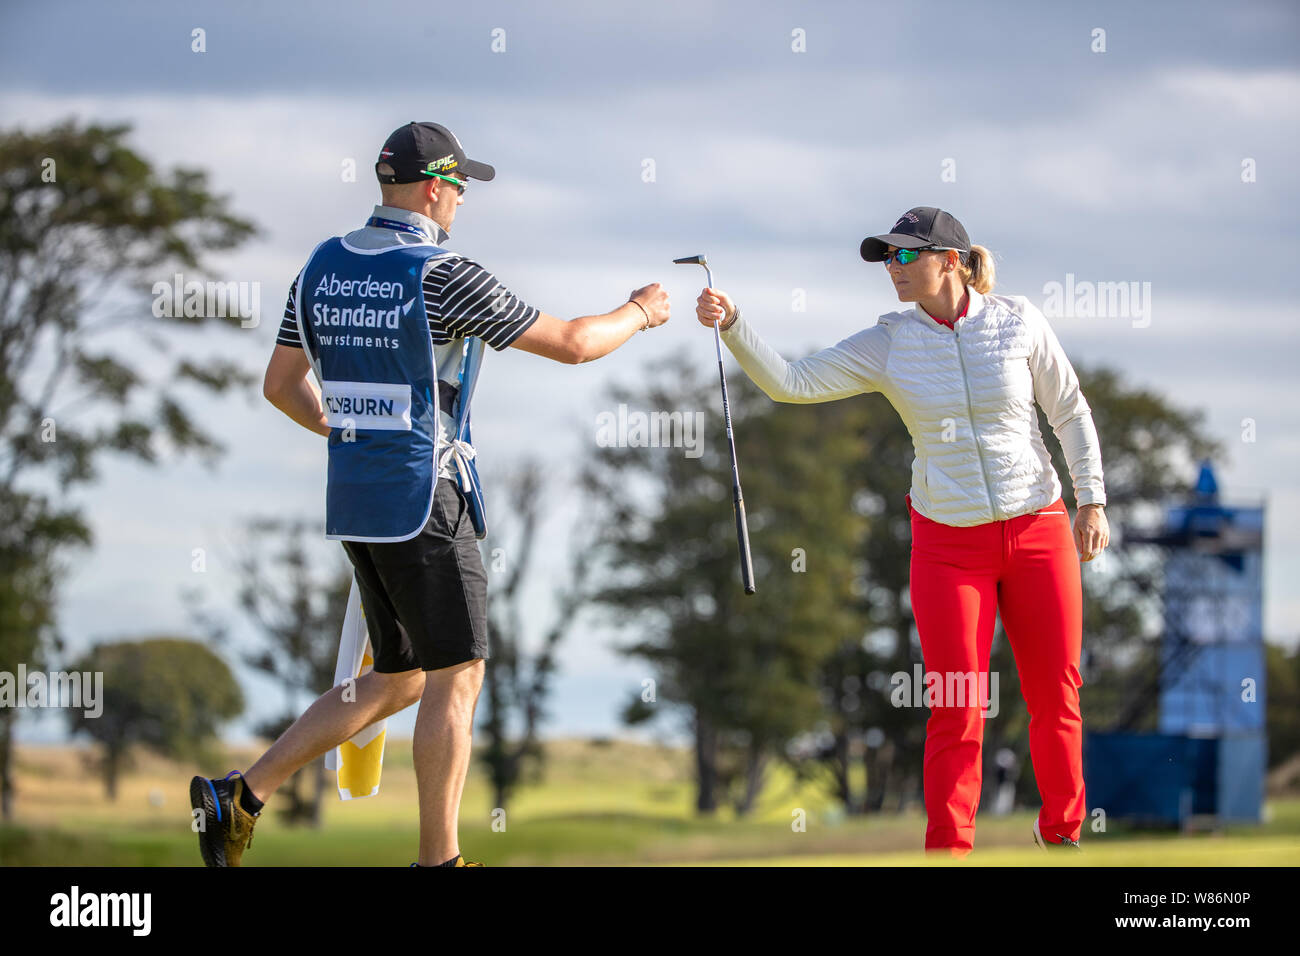 England's Holly Clyburn shares a little fist pump with her caddy following her birdie putt on the 9th green during day one of the Aberdeen Standard Investments Ladies Scottish Open at The Renaissance Club, North Berwick. Stock Photo